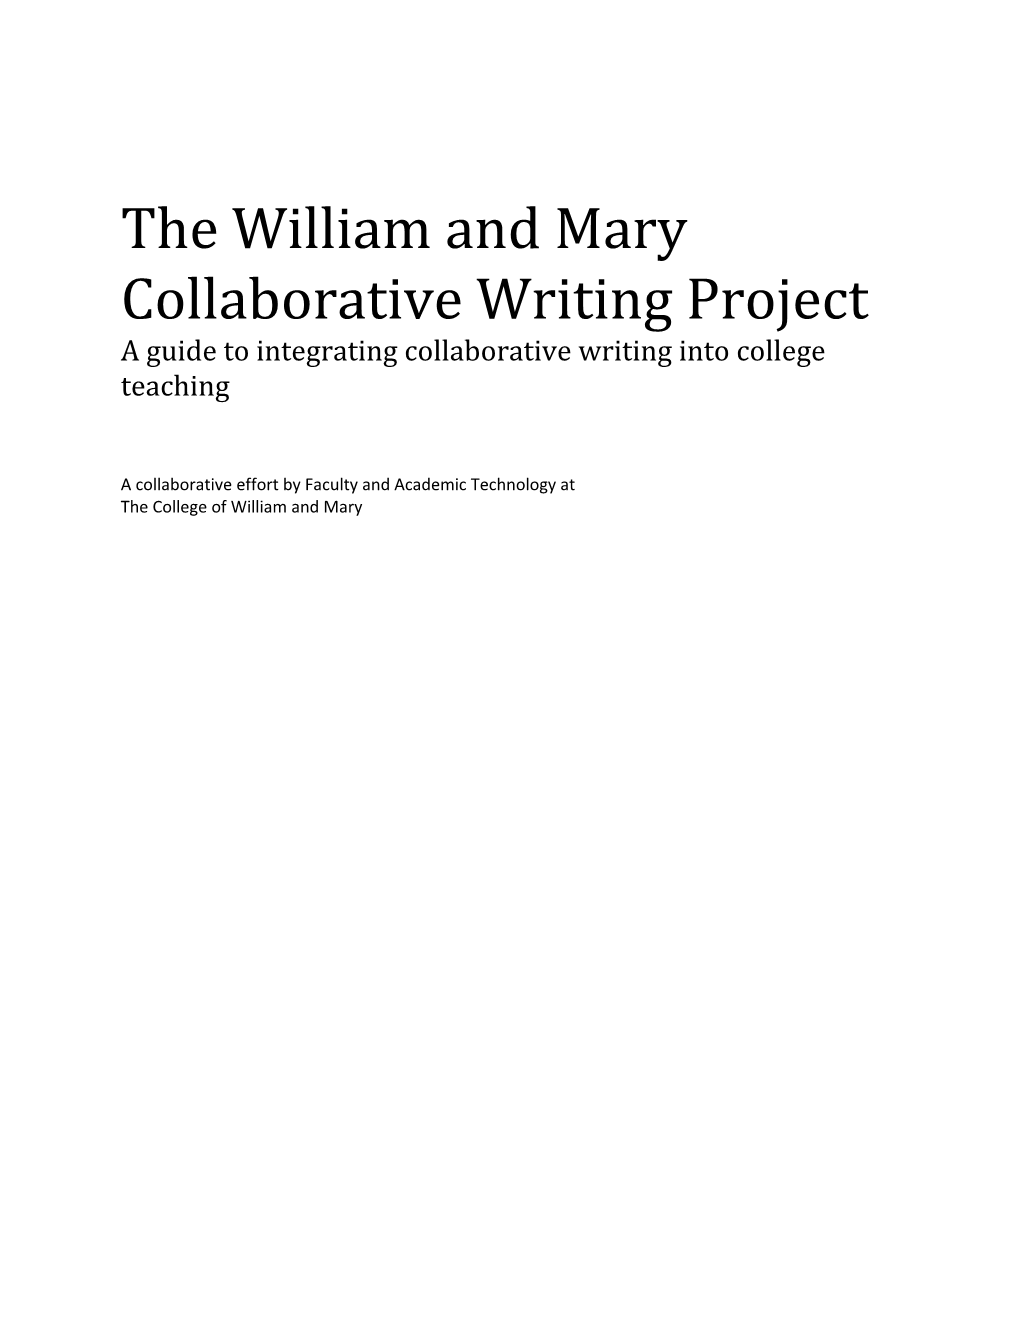 The William and Mary Collaborative Writing Project